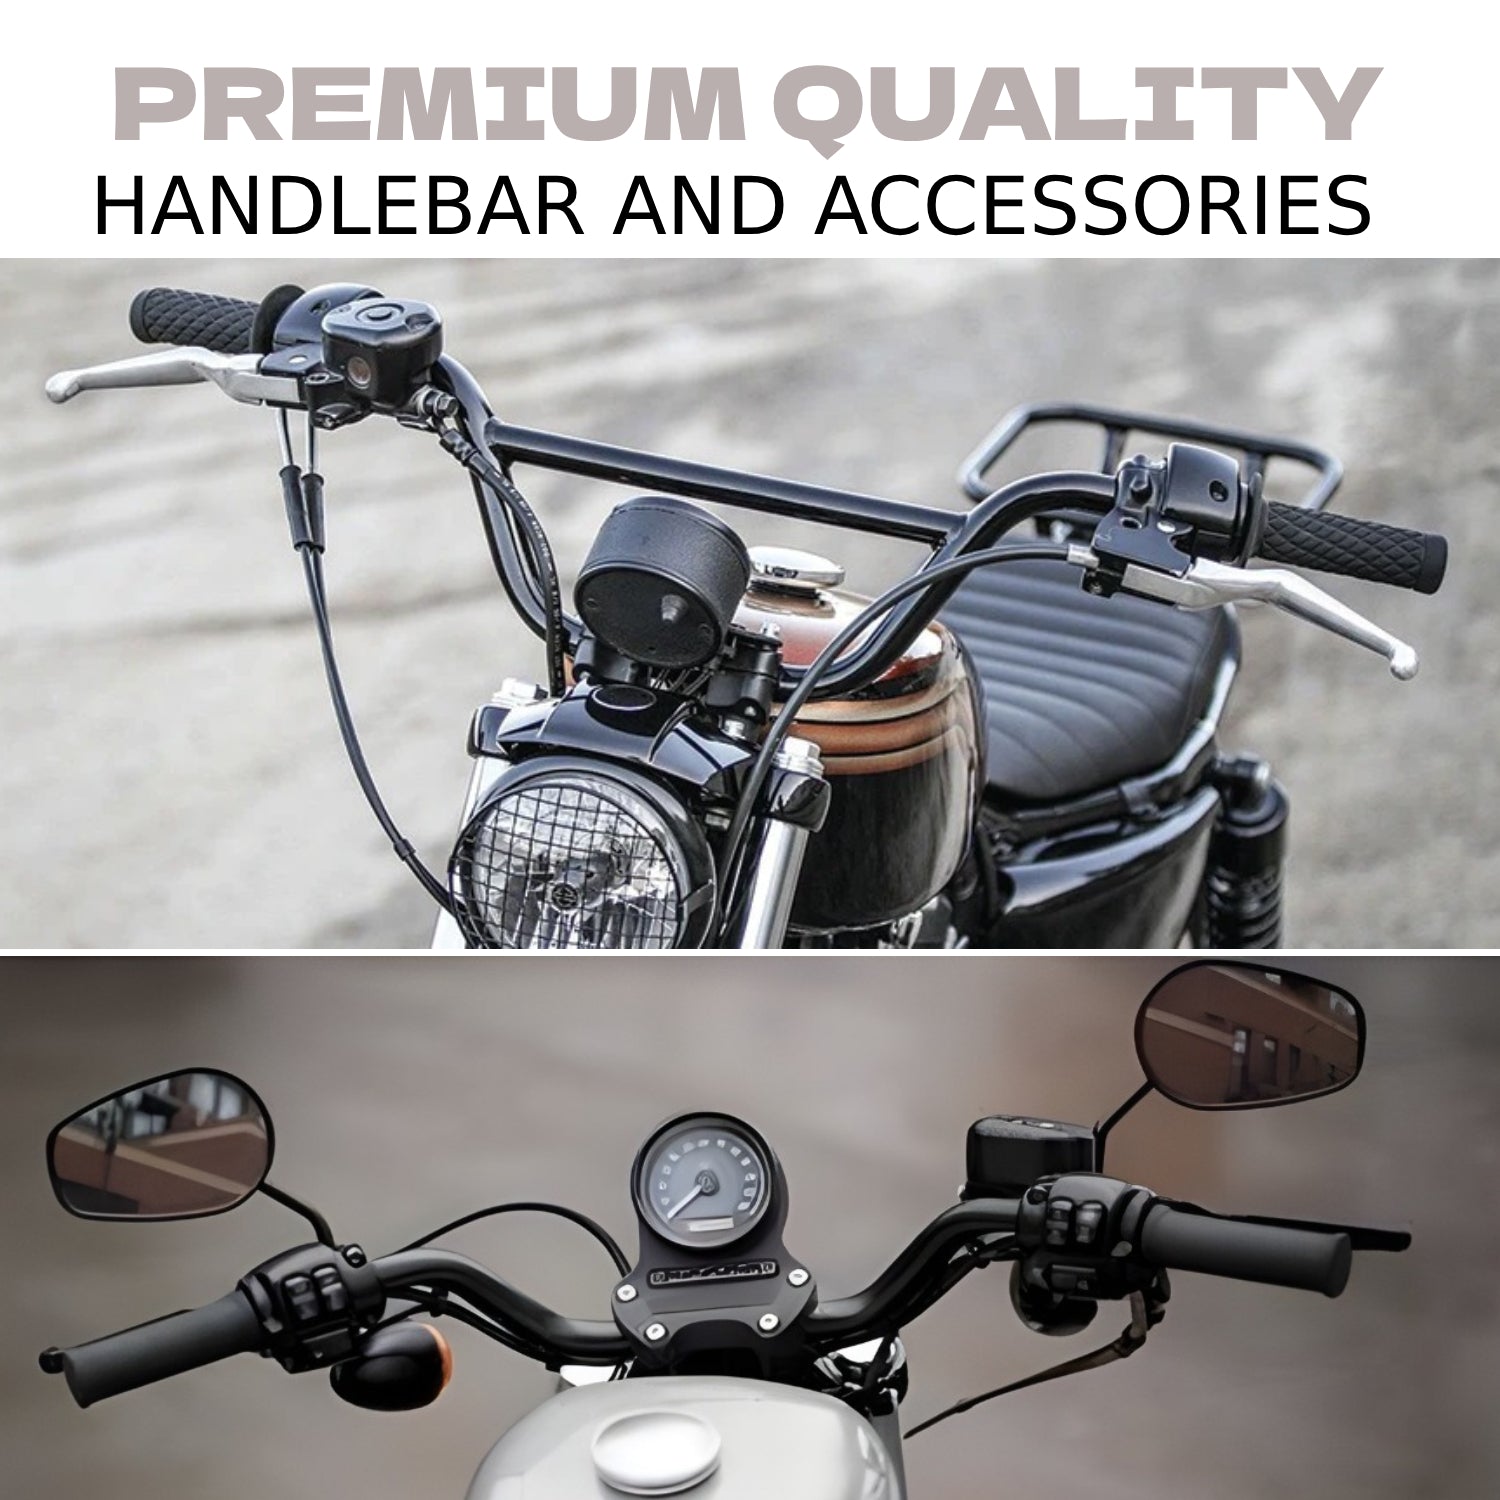 HANDLEBAR AND ACCESSORIES